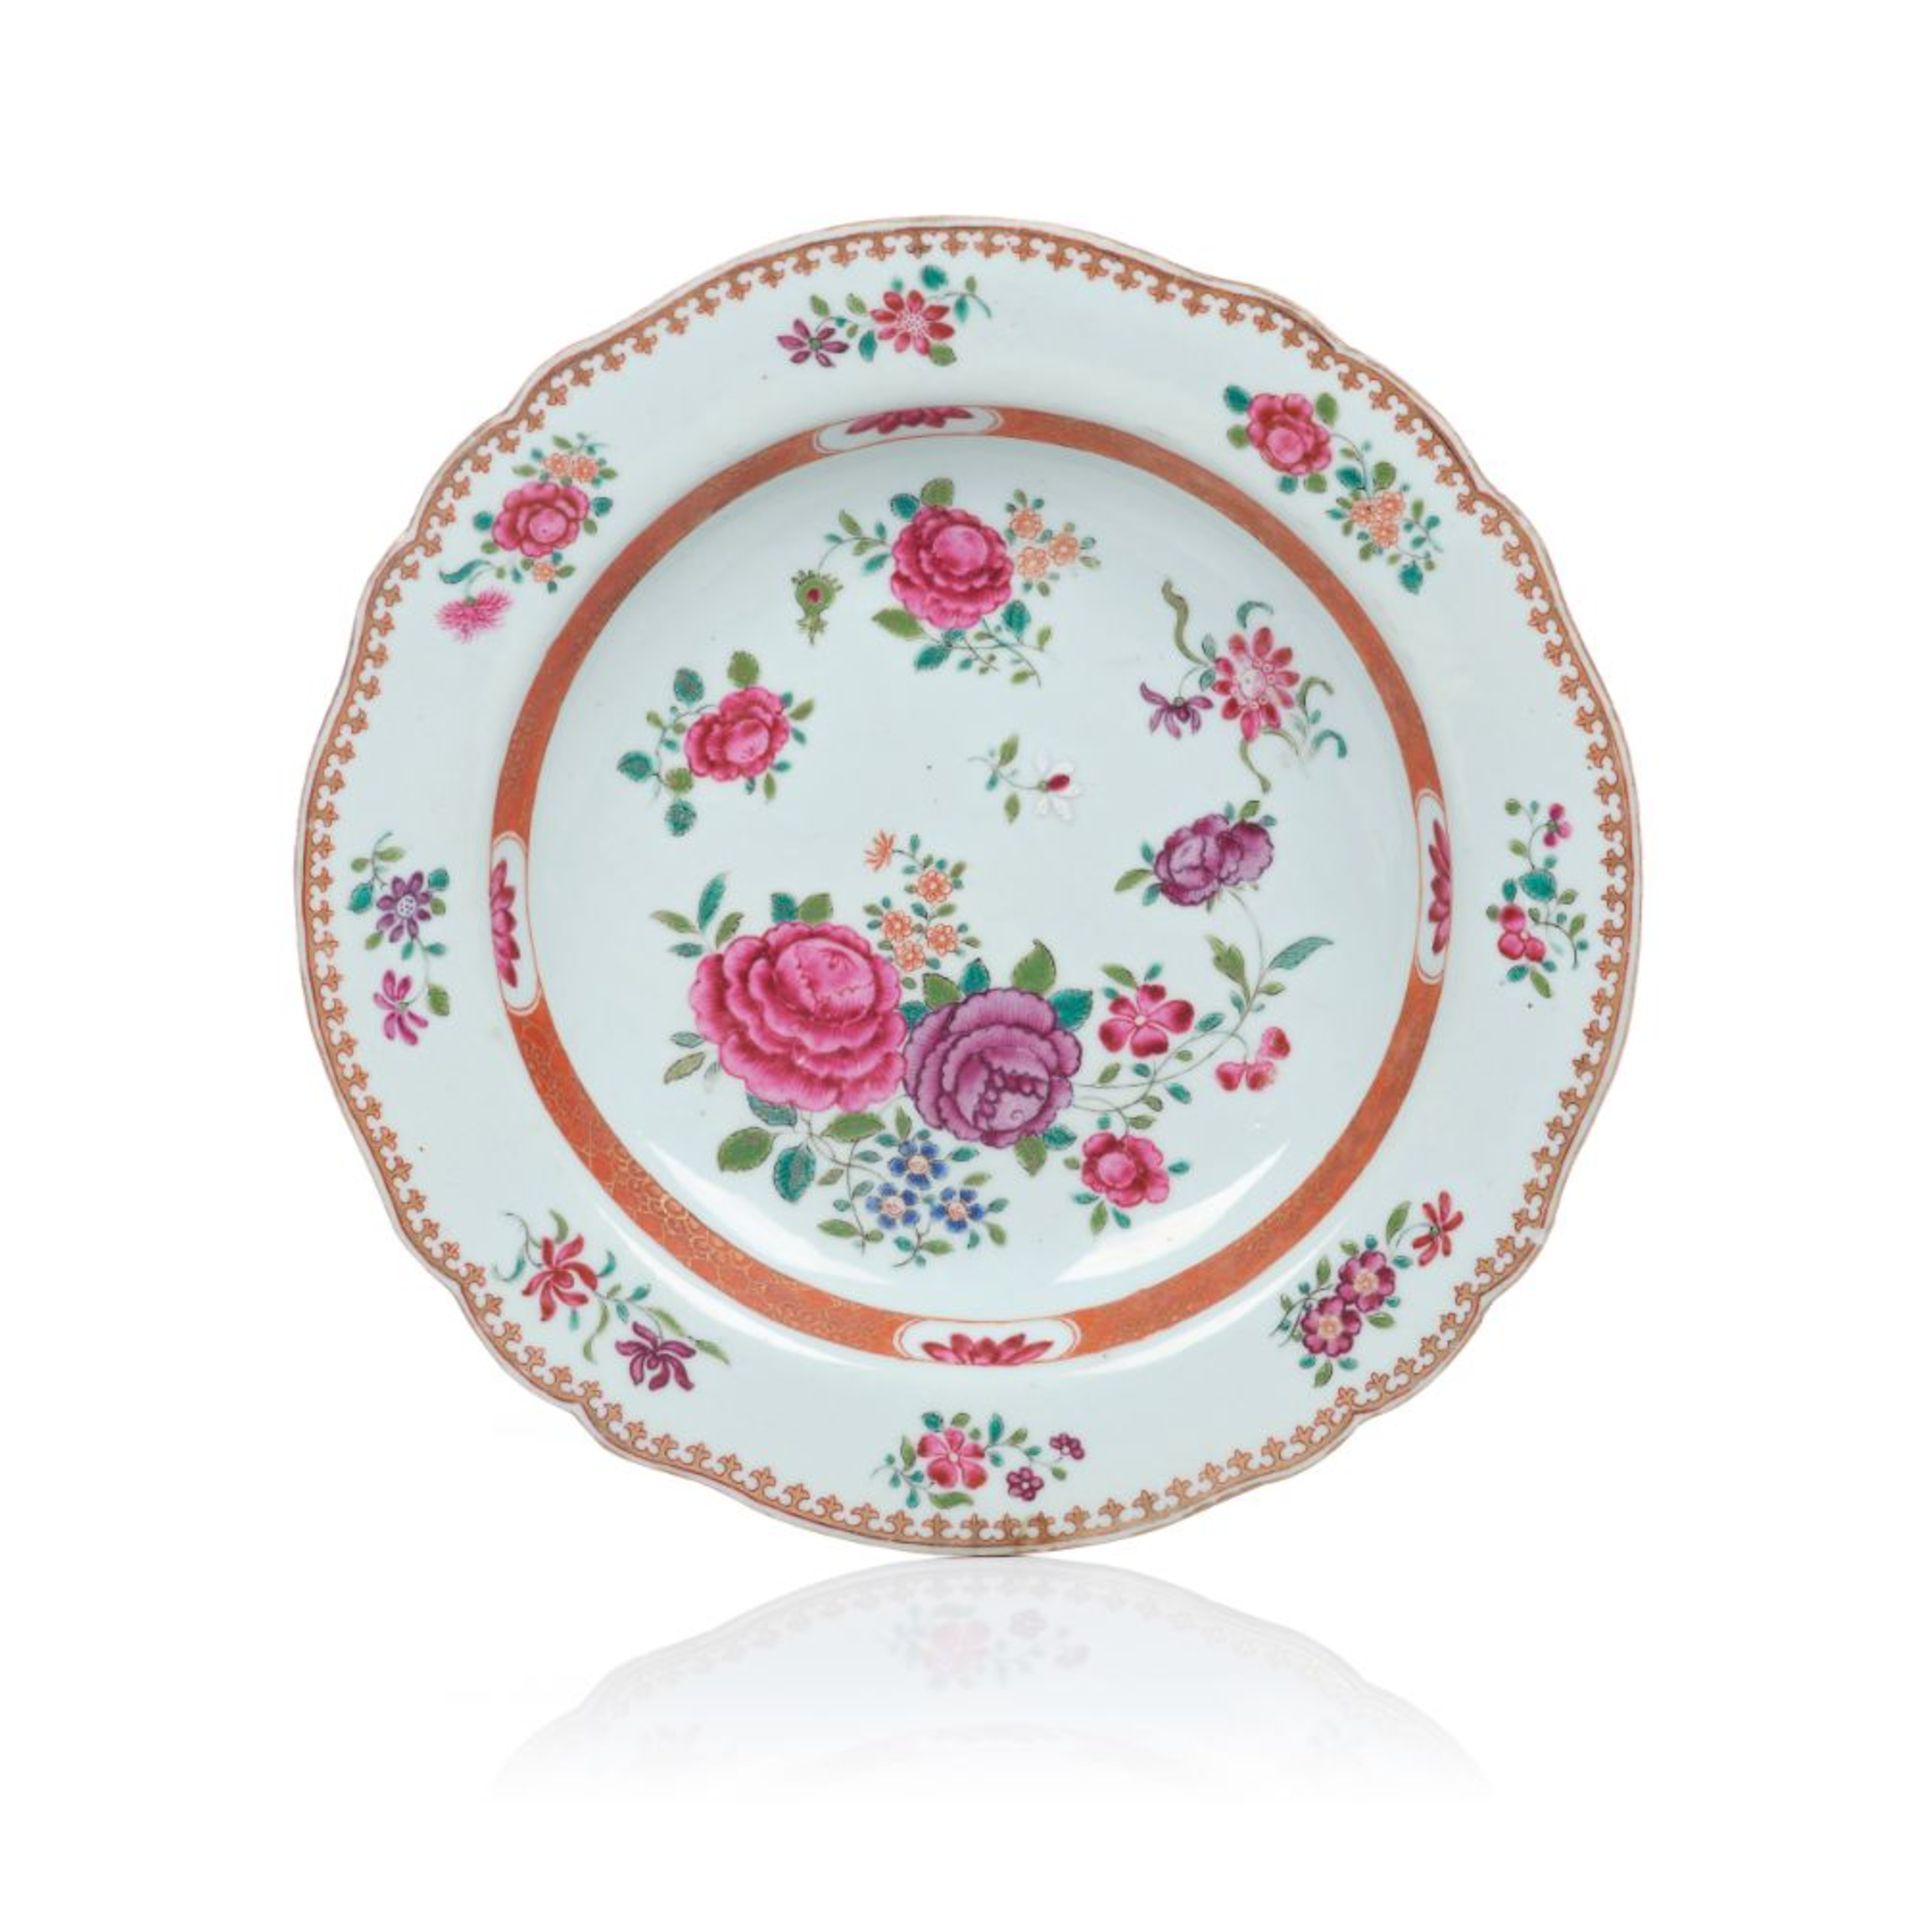 A deep scalloped plate, Chinese export porcelain, Polychrome floral "Famille Rose" enamelled and